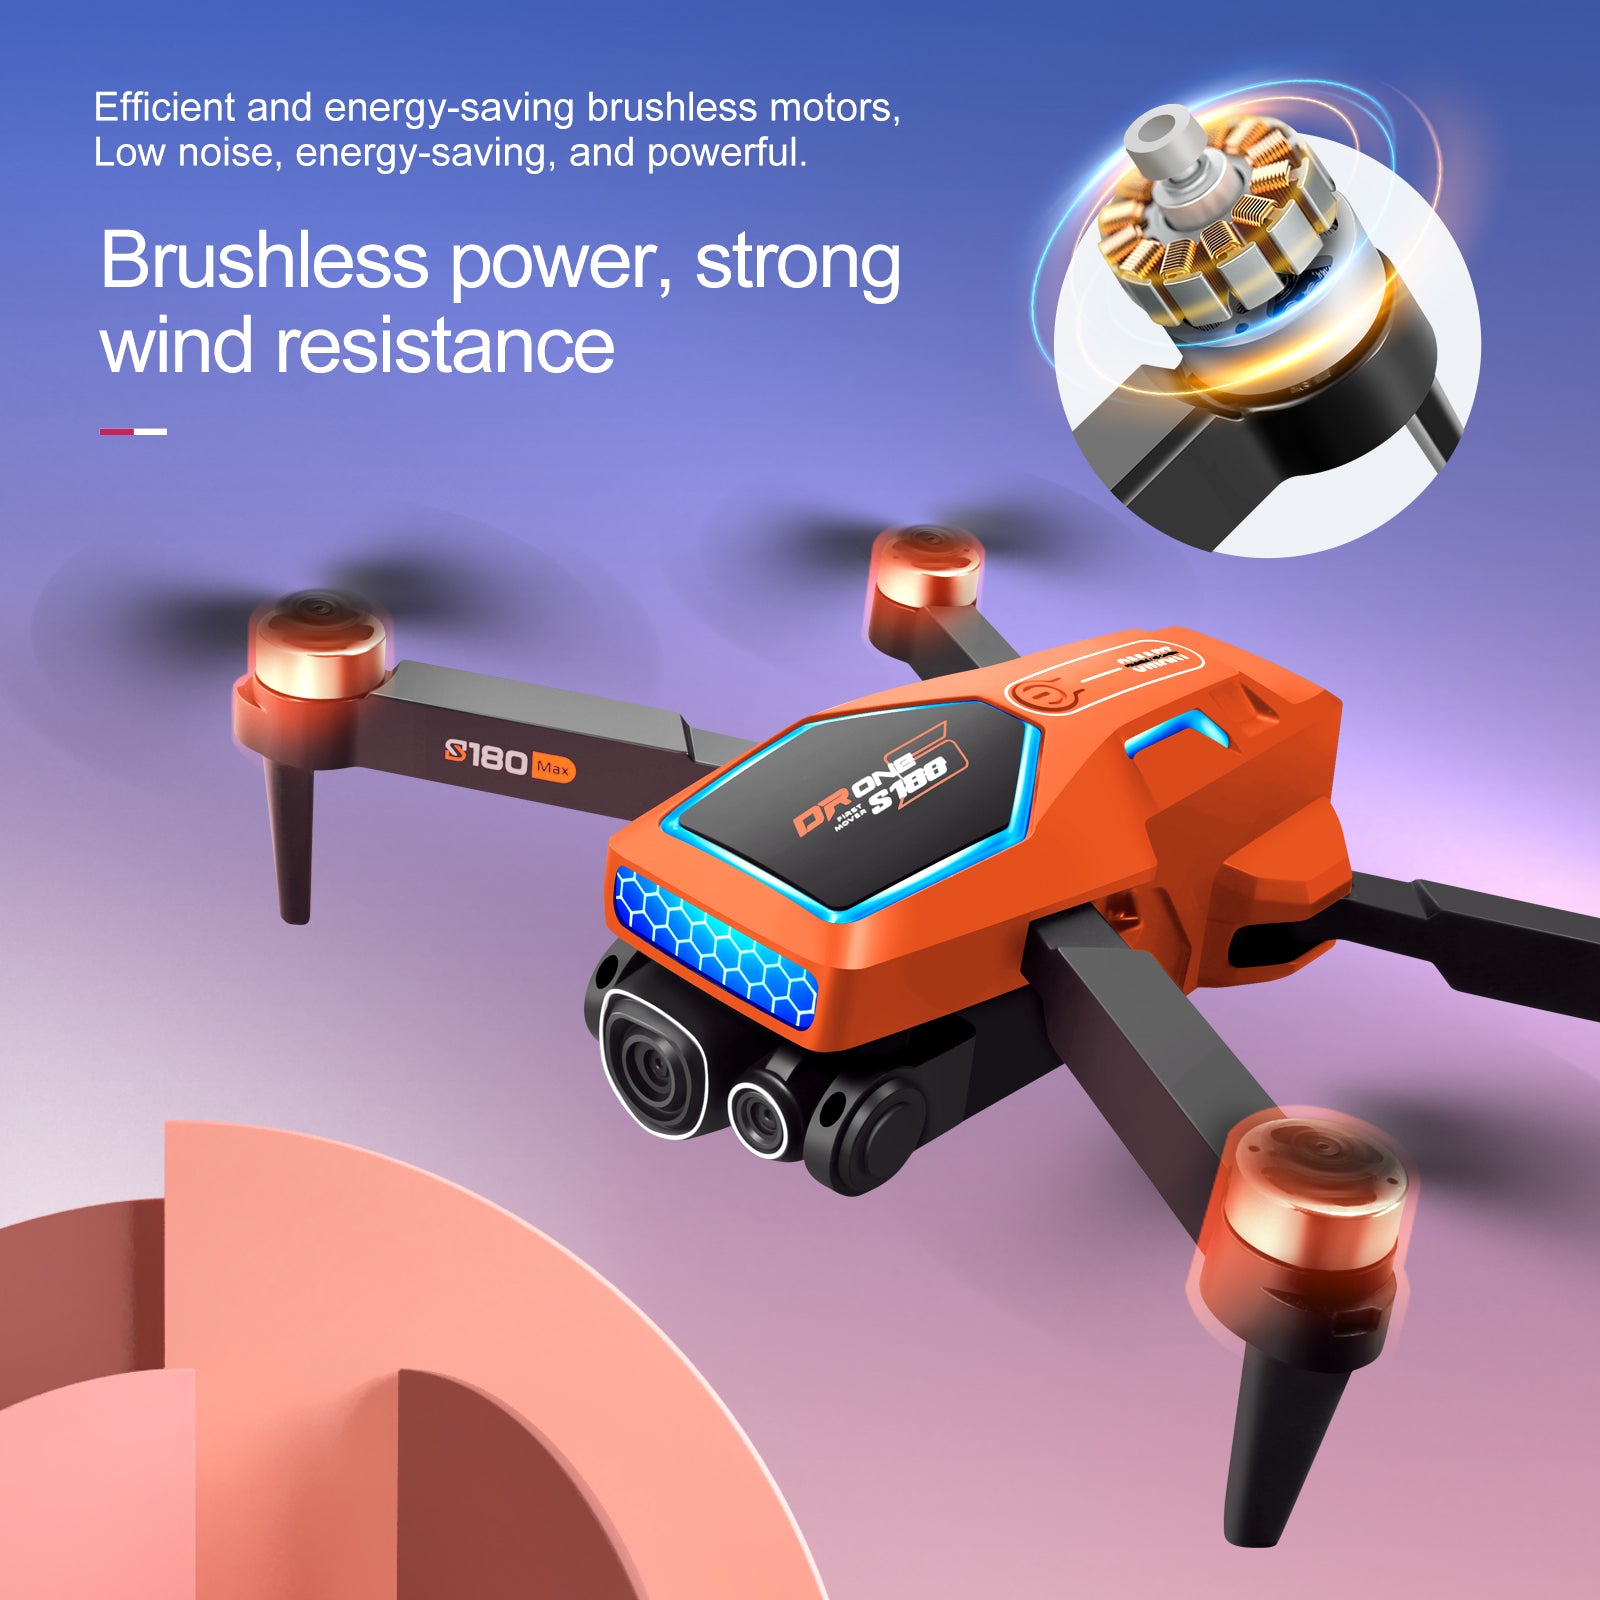 S180 Drone, Advanced drone with quiet brushless motors, energy-efficient design, and robust performance against windy conditions.